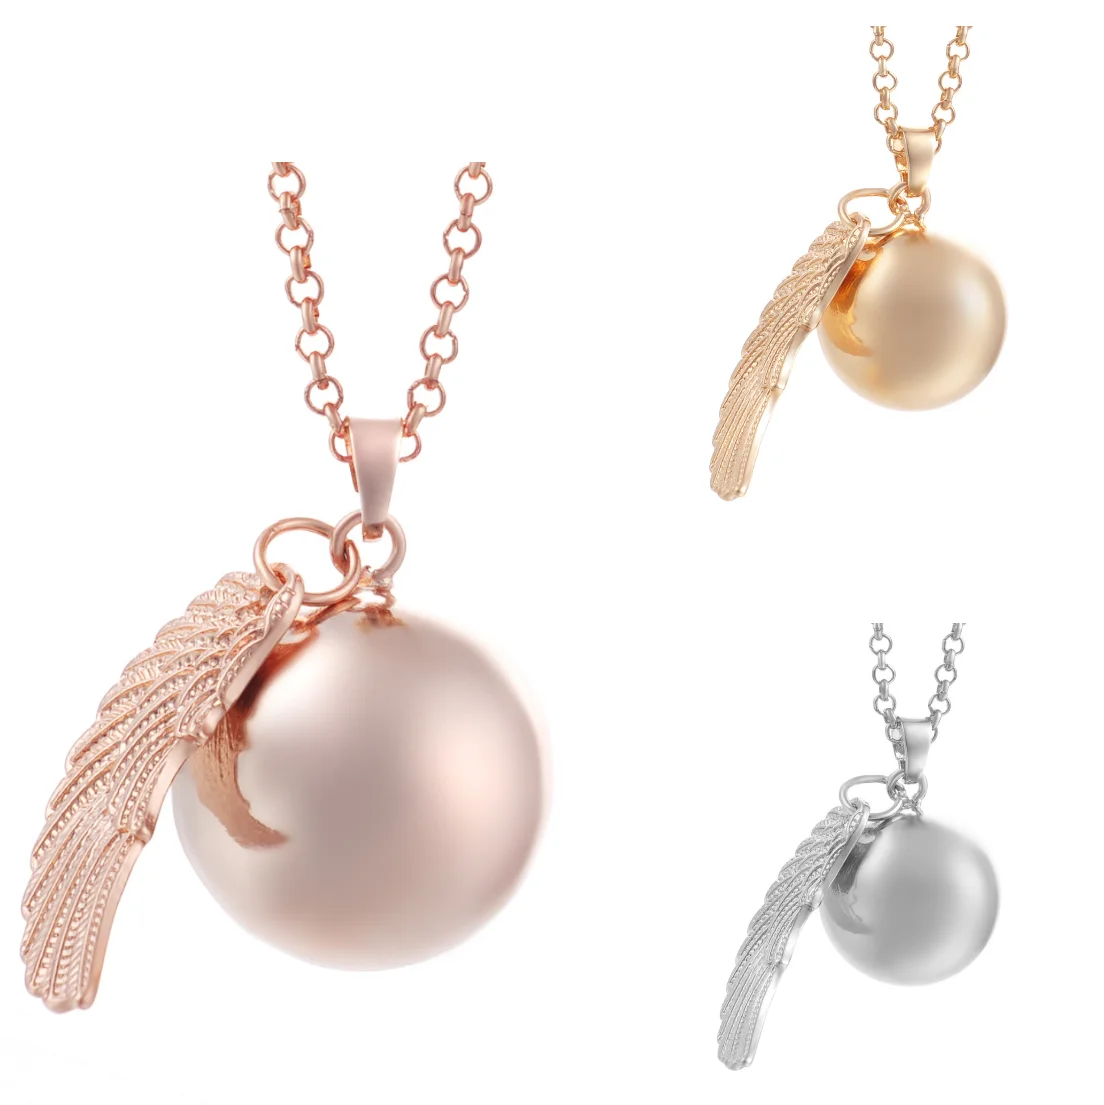 2 Styles Pregnant Necklace Big Bola Ball/ Heart Chime Pendant Necklace for Pregnant Women Unborn Baby Angel Wings Sweet Gift